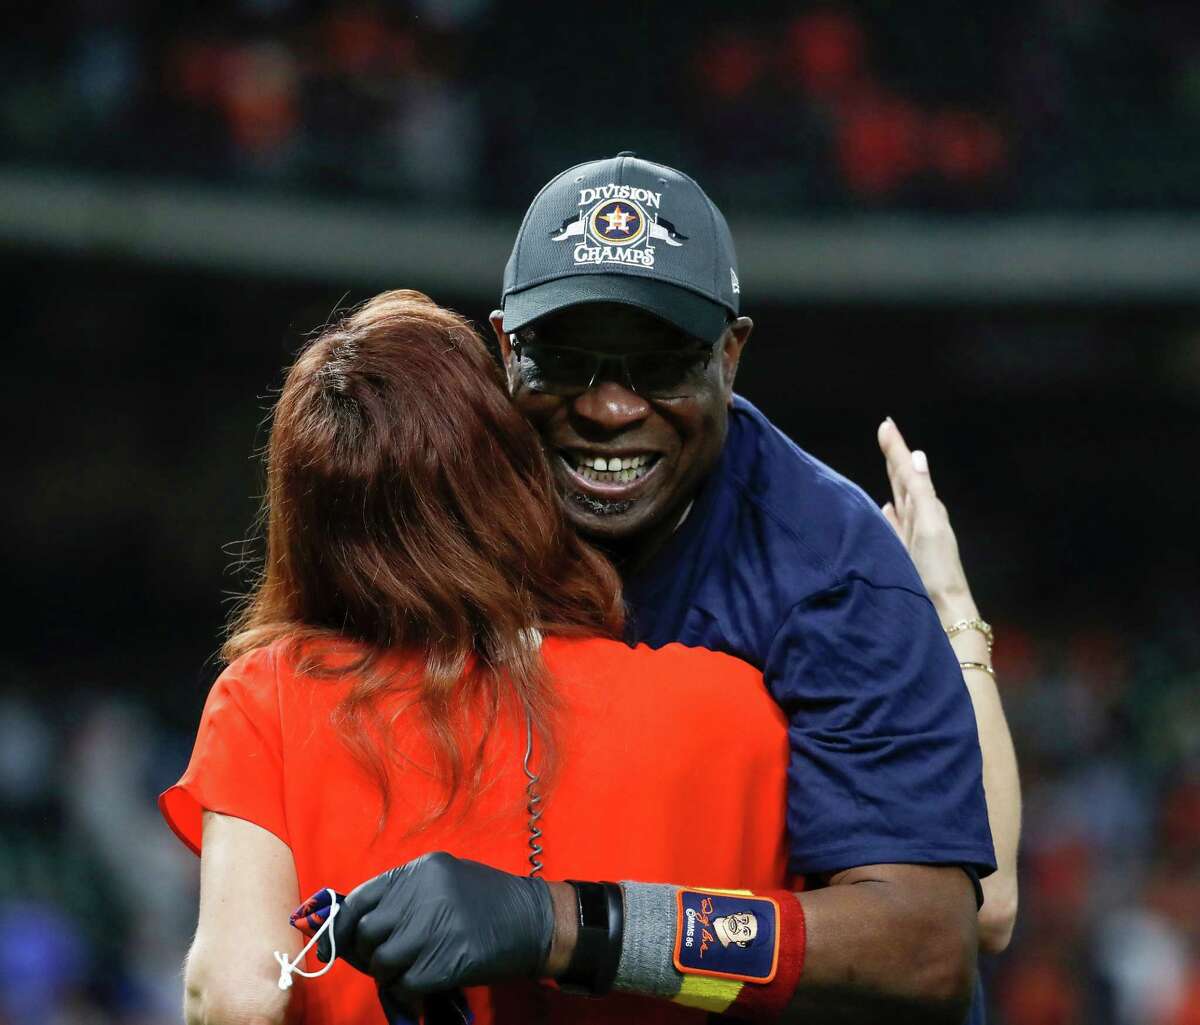 HOUSTON, TEXAS - SEPTEMBER 30: Manager Dusty Baker Jr. #12 of the Houston Astros celebrates after the game against the Tampa Bay Rays at Minute Maid Park on September 30, 2021 in Houston, Texas.